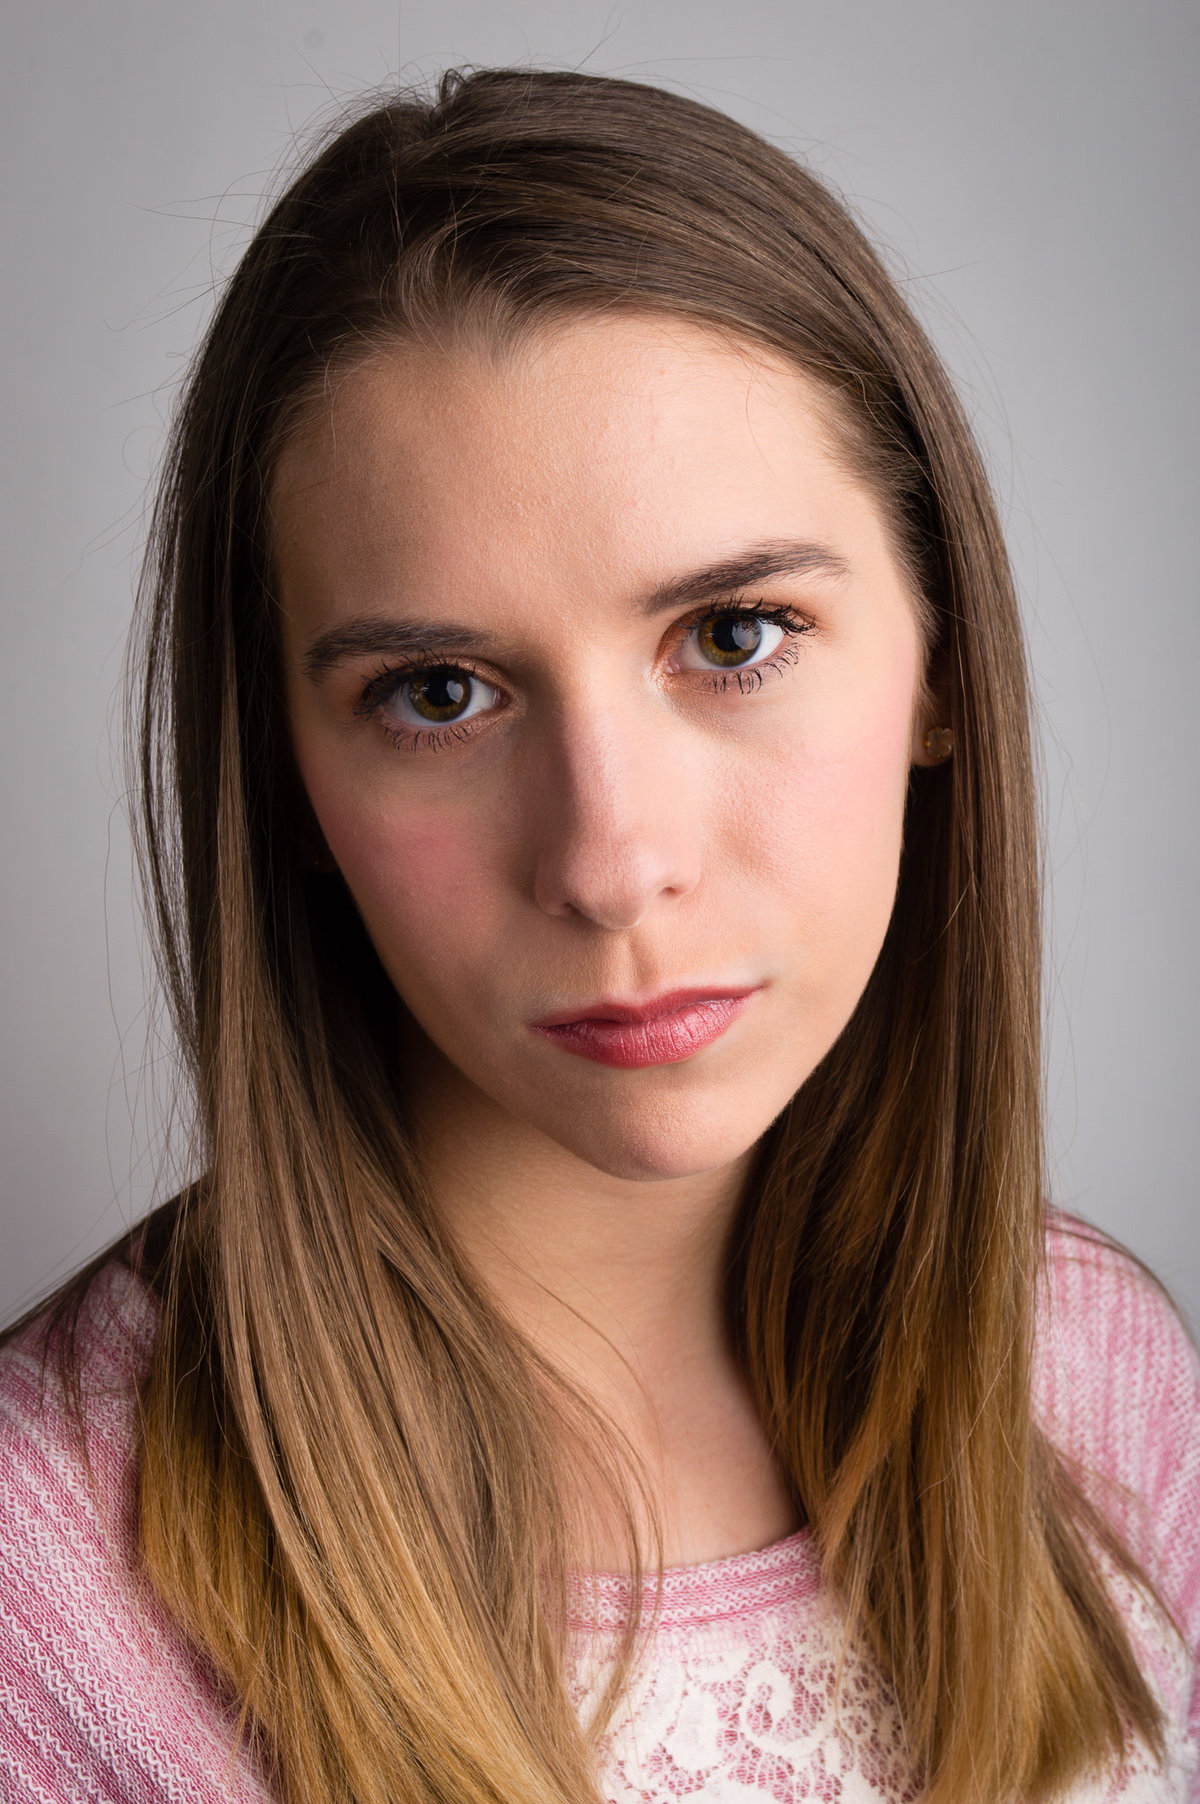 Modeling headshot of a young adult with a grey background